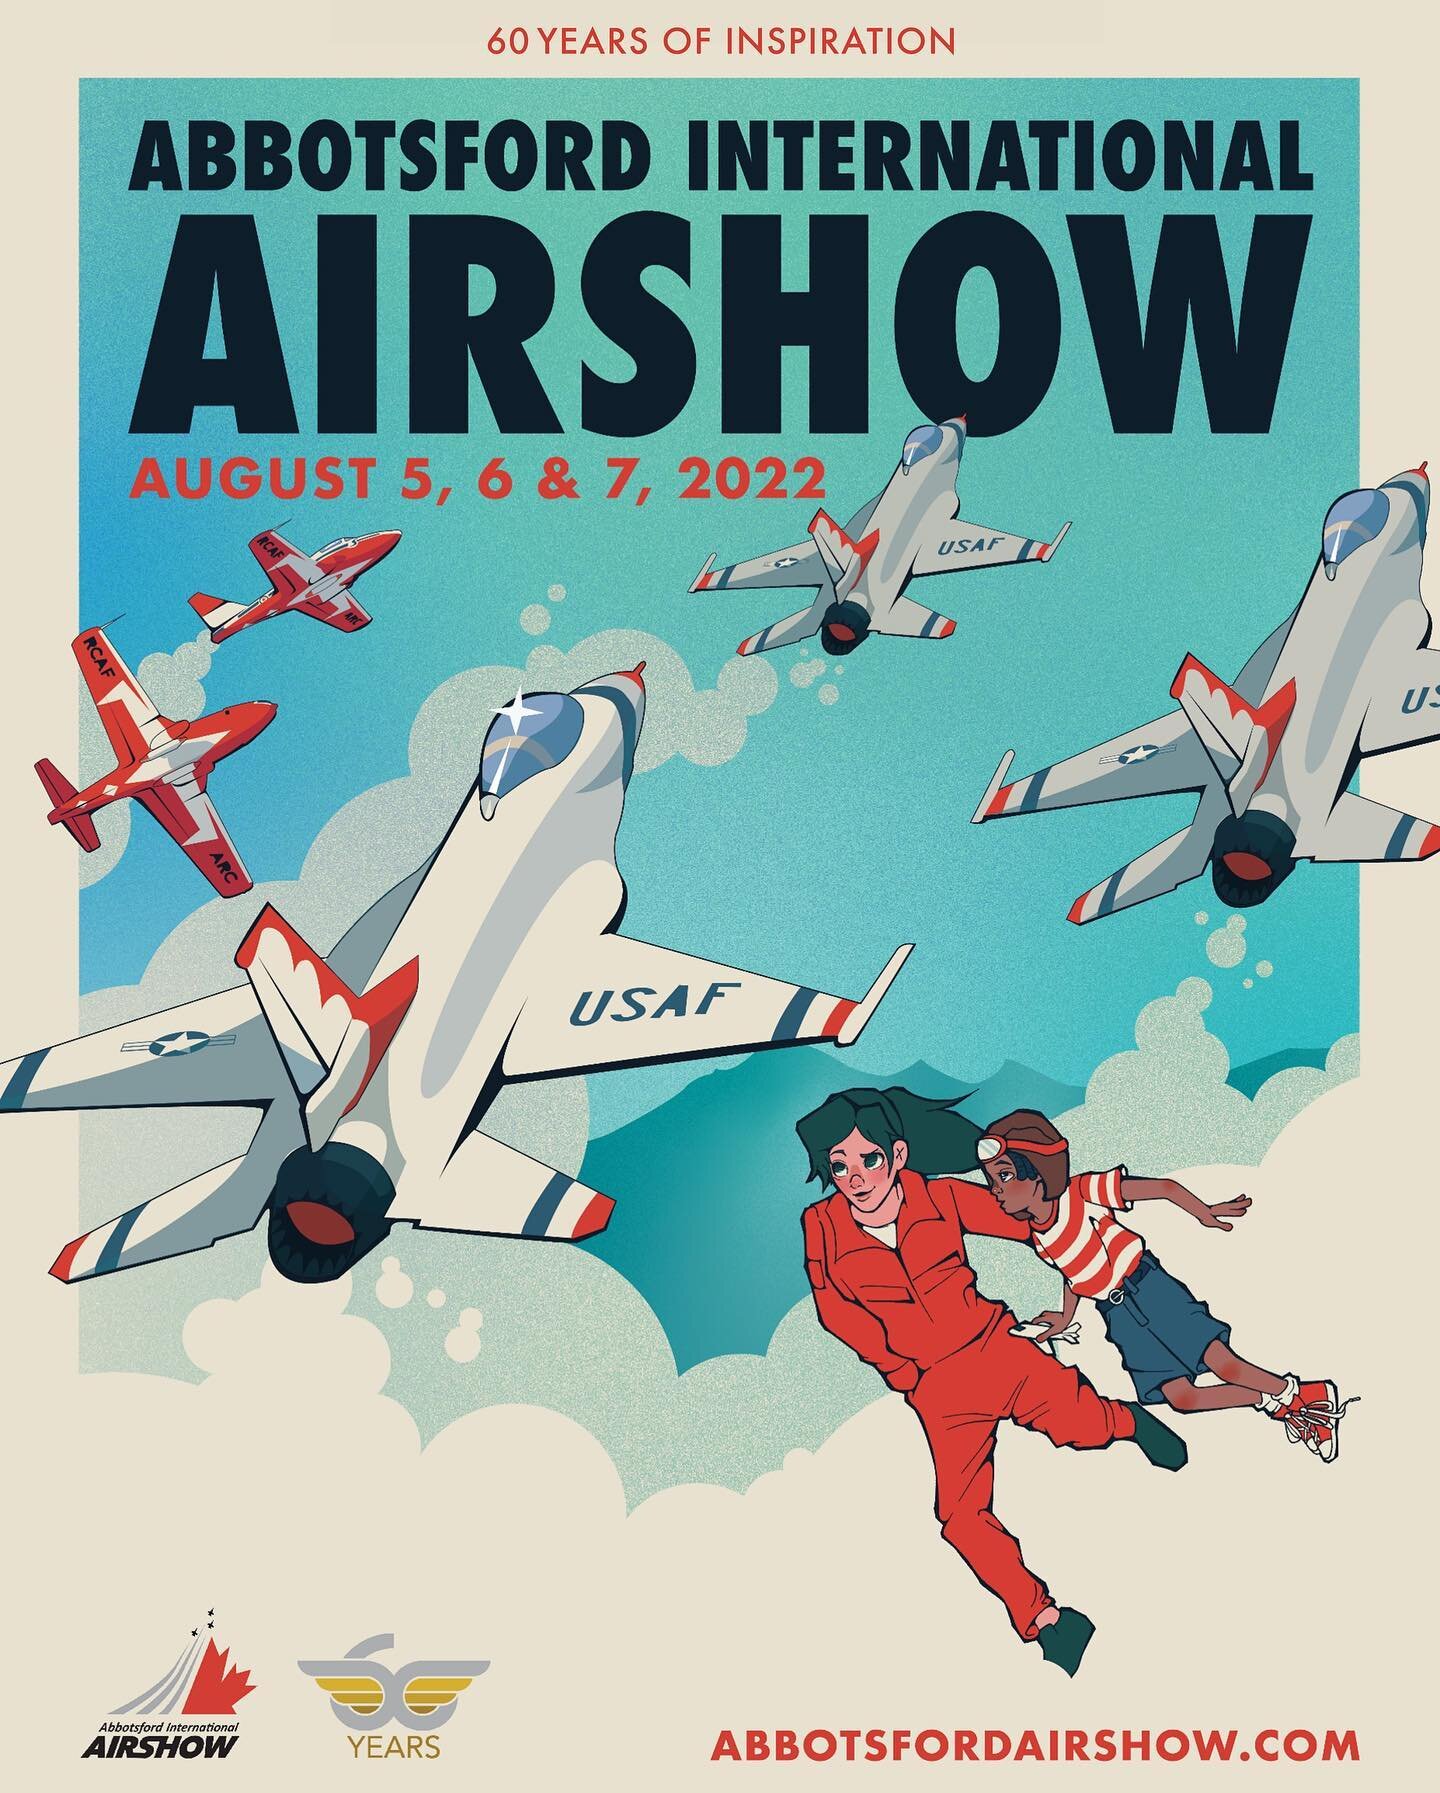 Don&rsquo;t know what to do this weekend? 

60 years and still going strong! 

We are only 25 minutes away from the air show. 

@abbyairshow